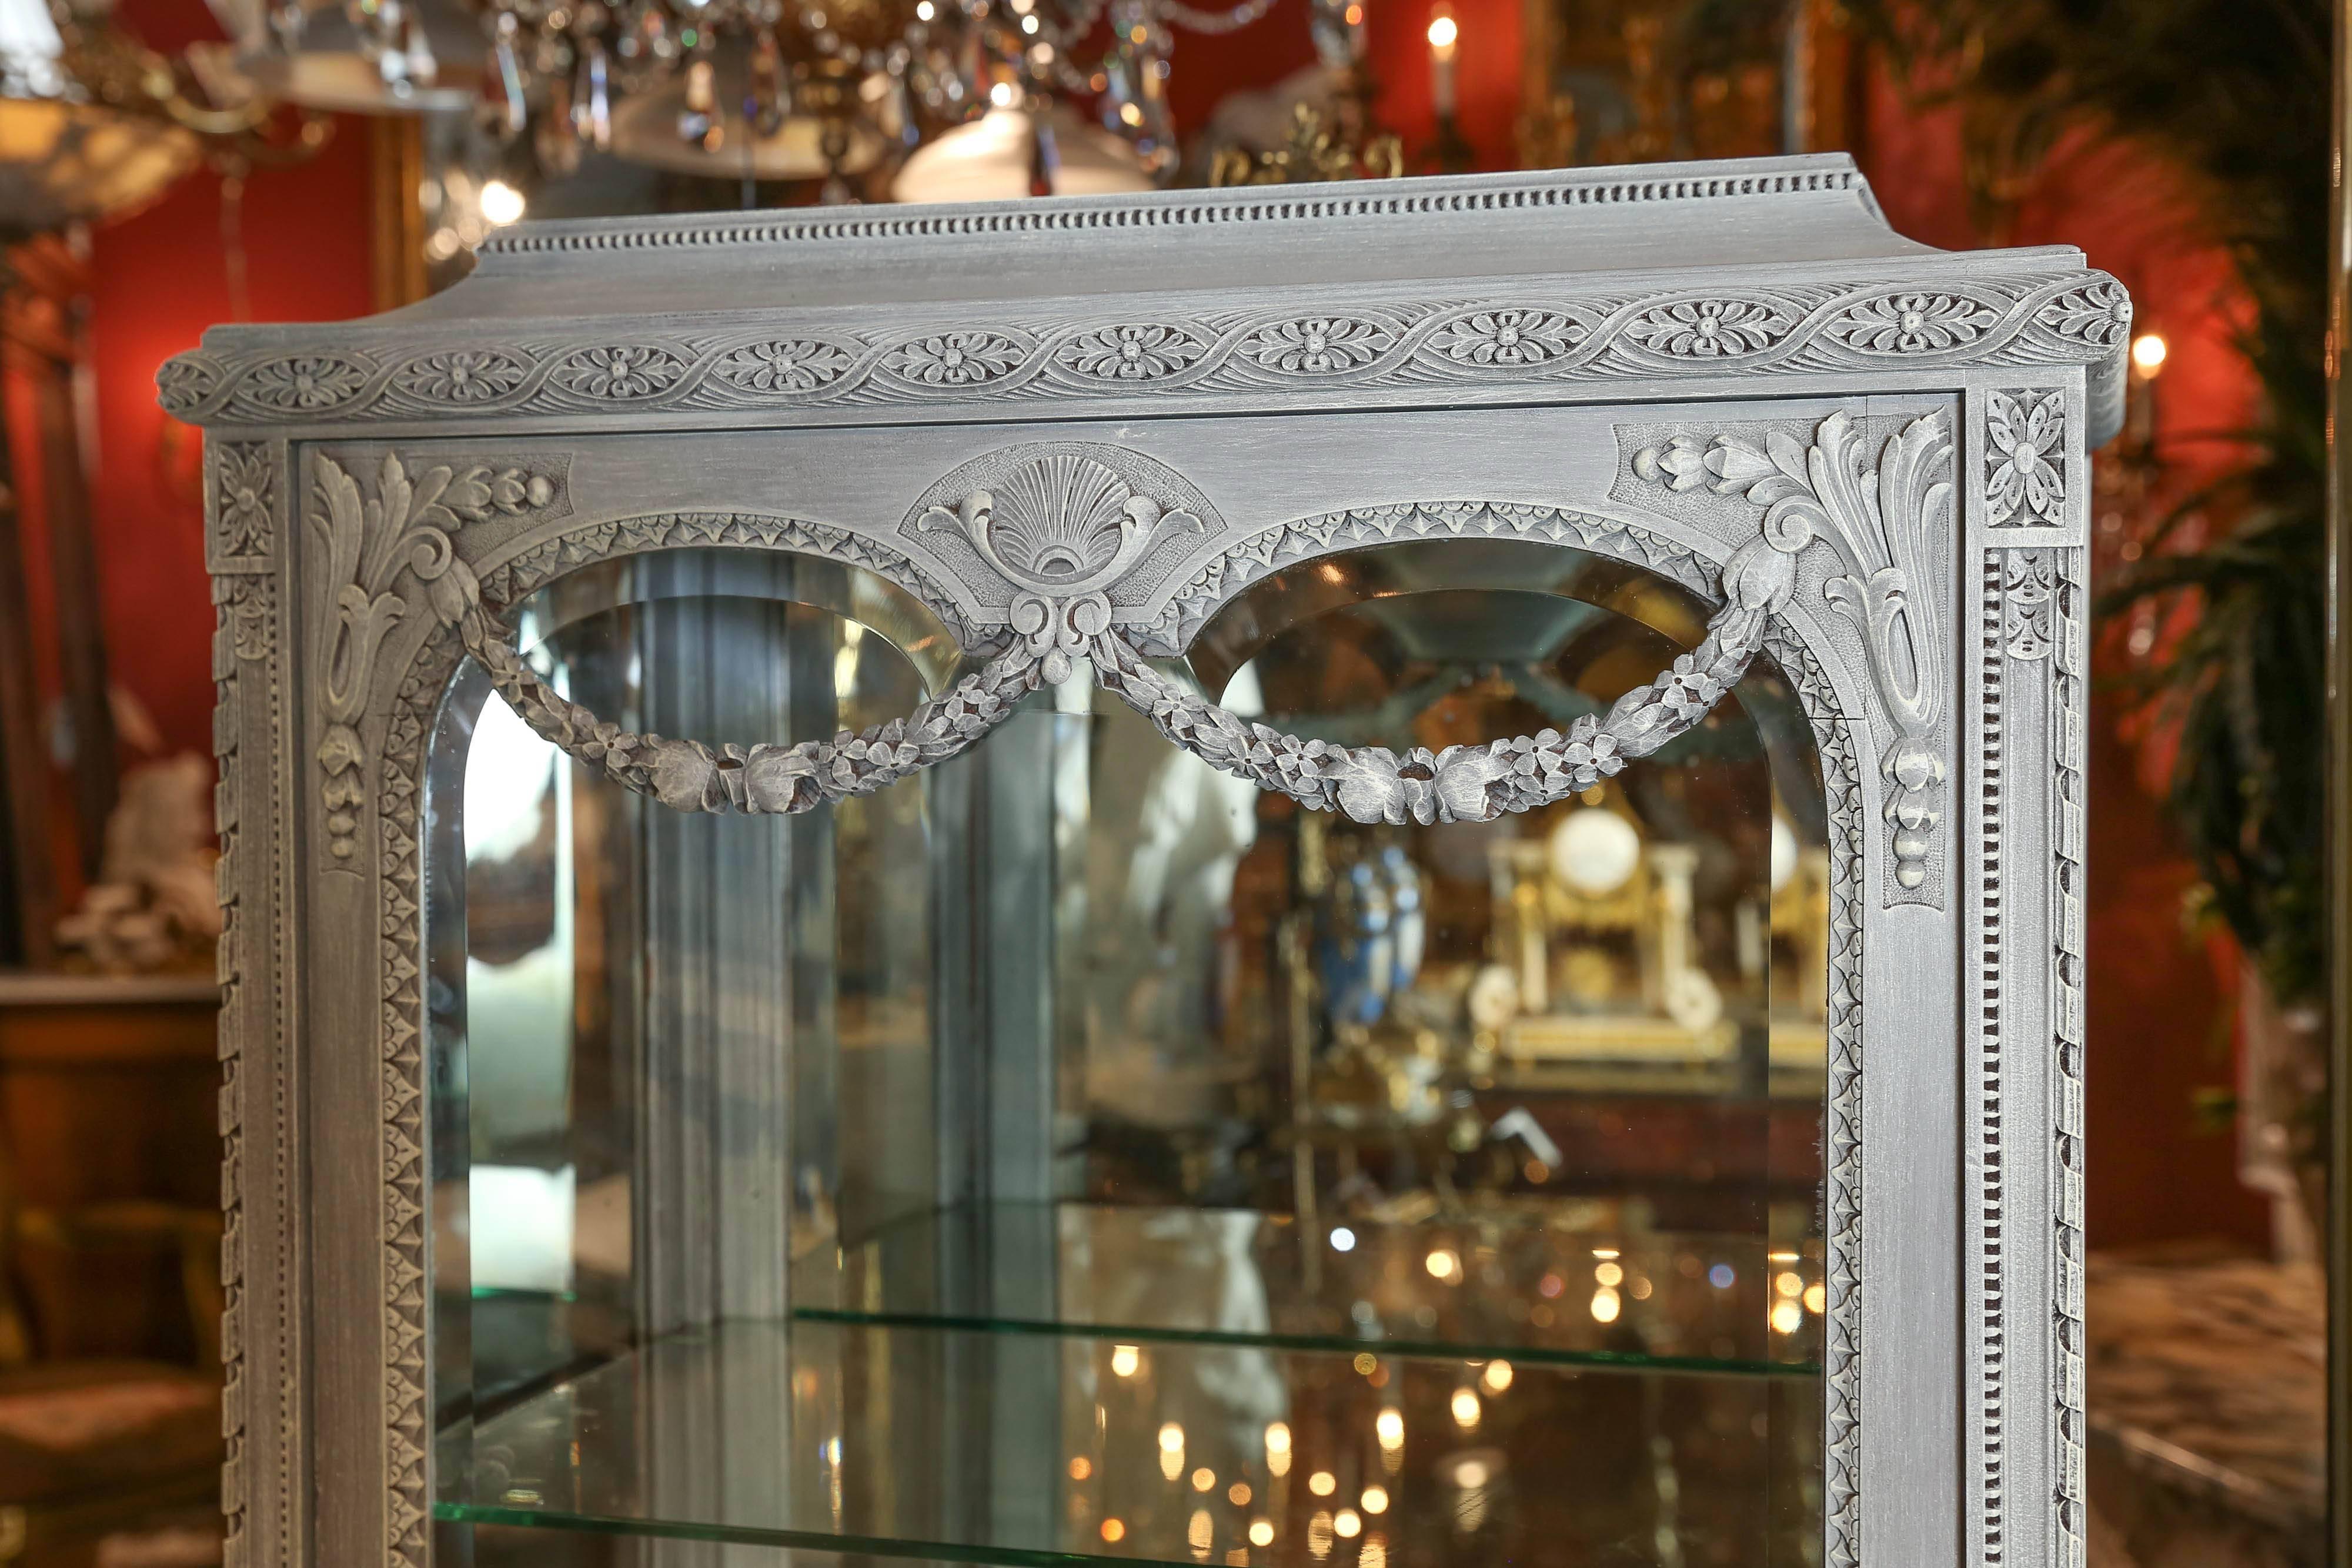 Elegant Louis XVI style vitrine or display cabinet, late 19th century that has
Been painted in grey with lighter highlights. Pretty Foliate garland
Enhances the upper portion of this piece. The back is mirrored and
Displays the contents